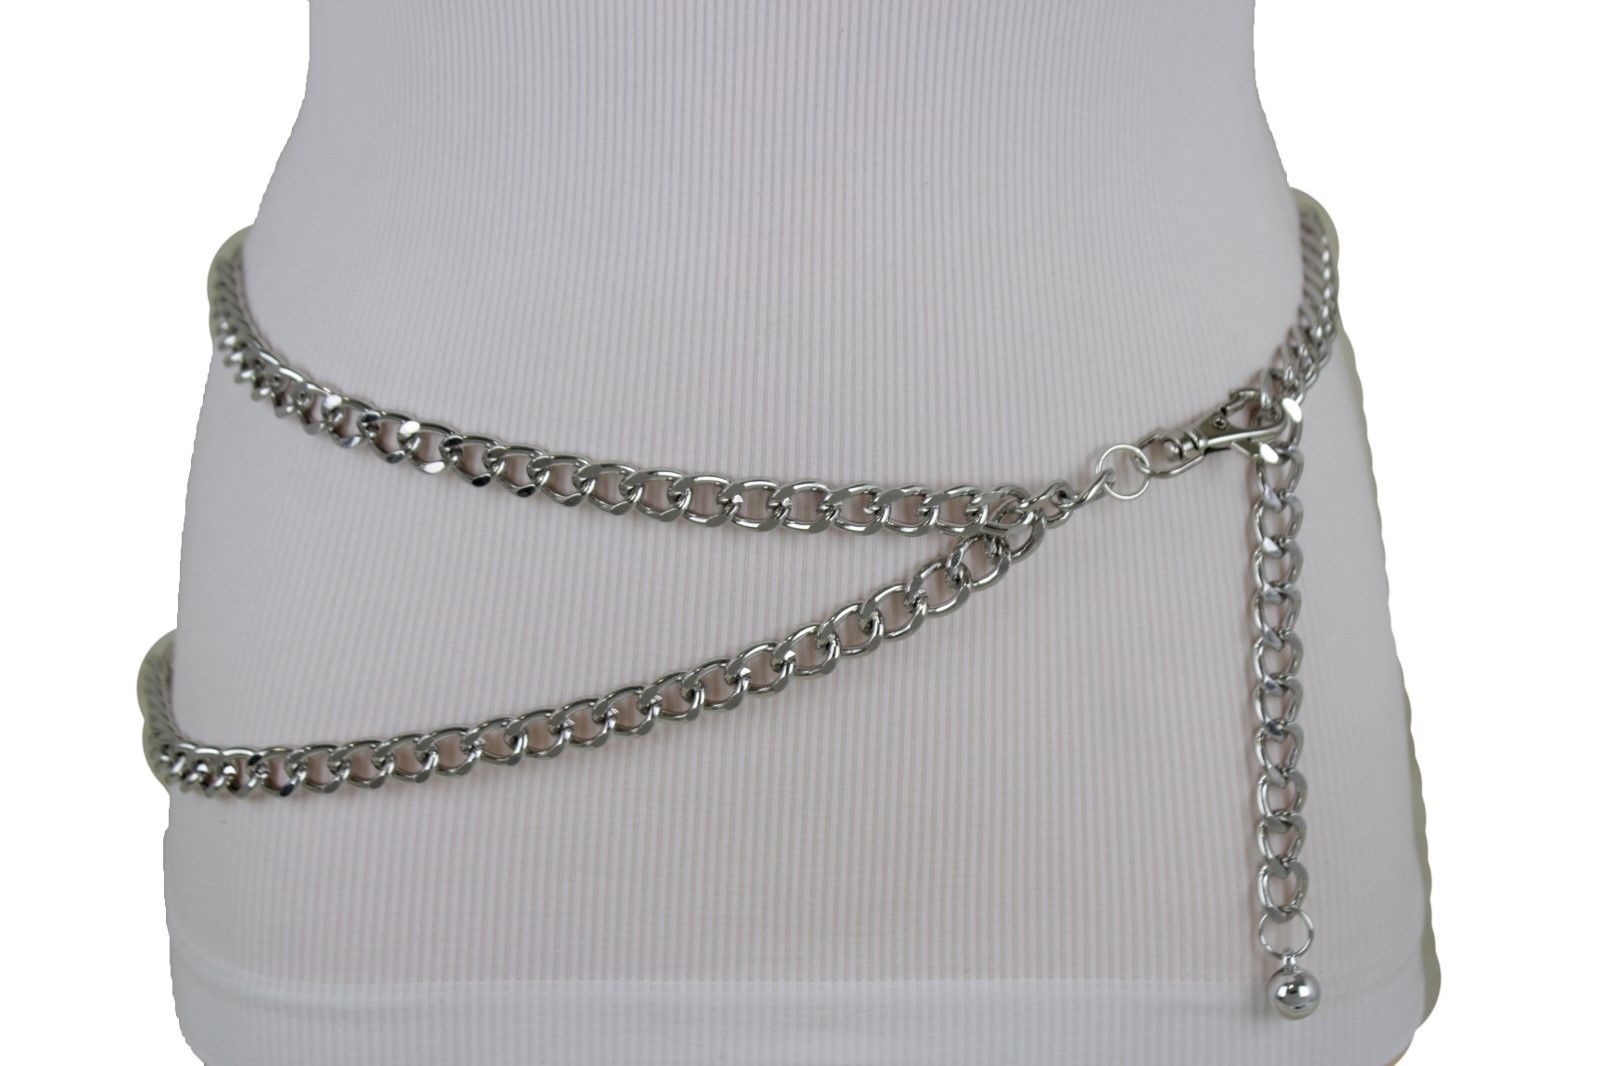 Silver Gold Black Women Belt Thick Metal Chunky Chain Link Side